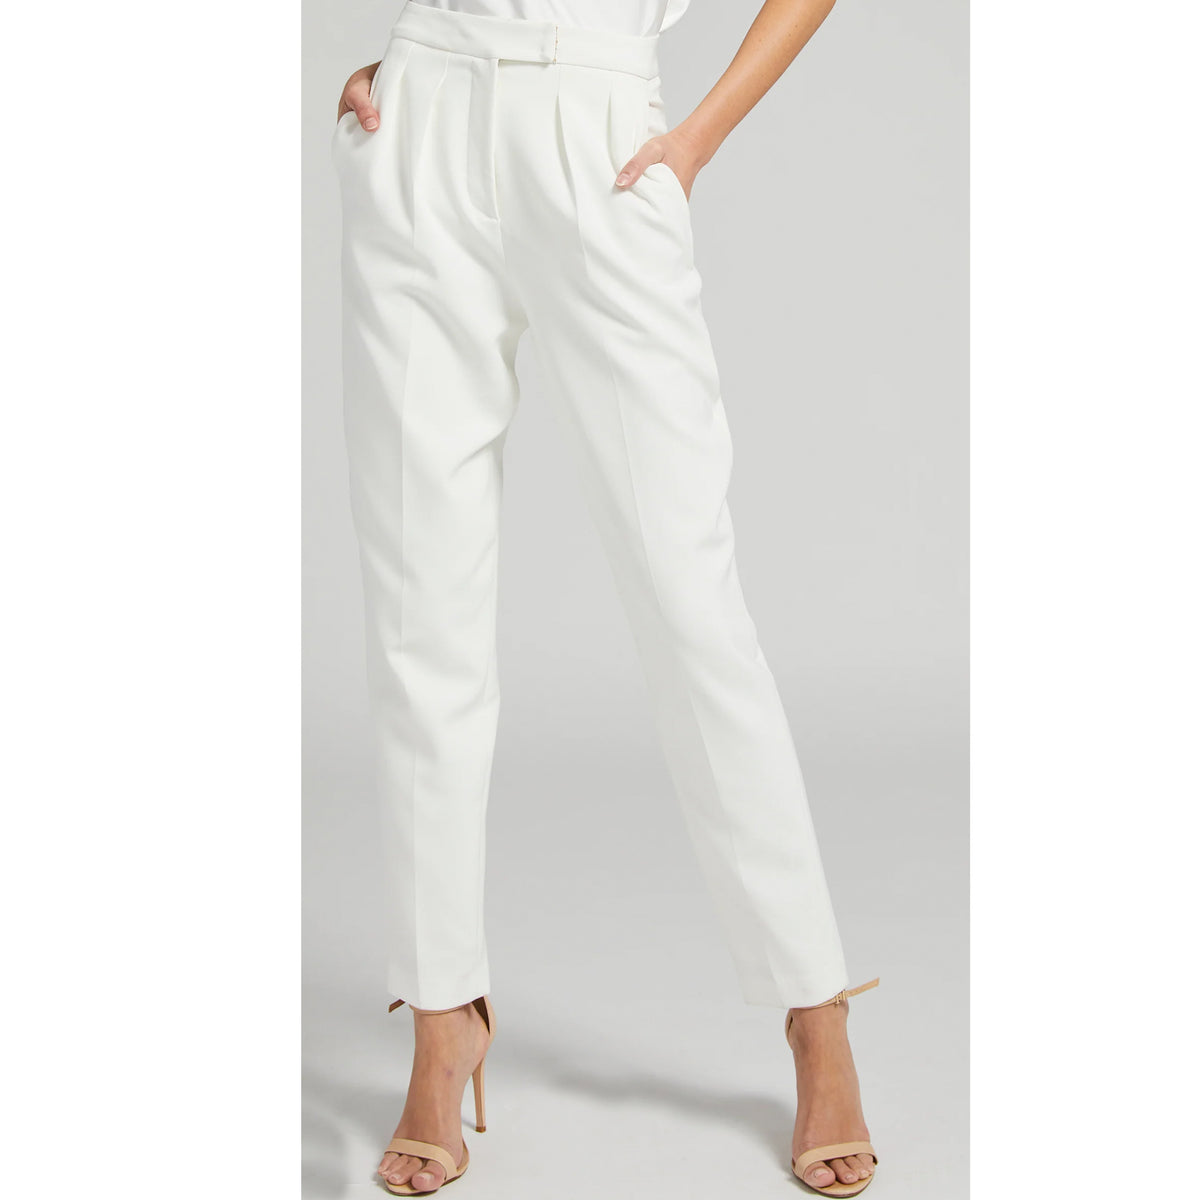 Generation Love Jenise Crepe High Waisted Pant in White